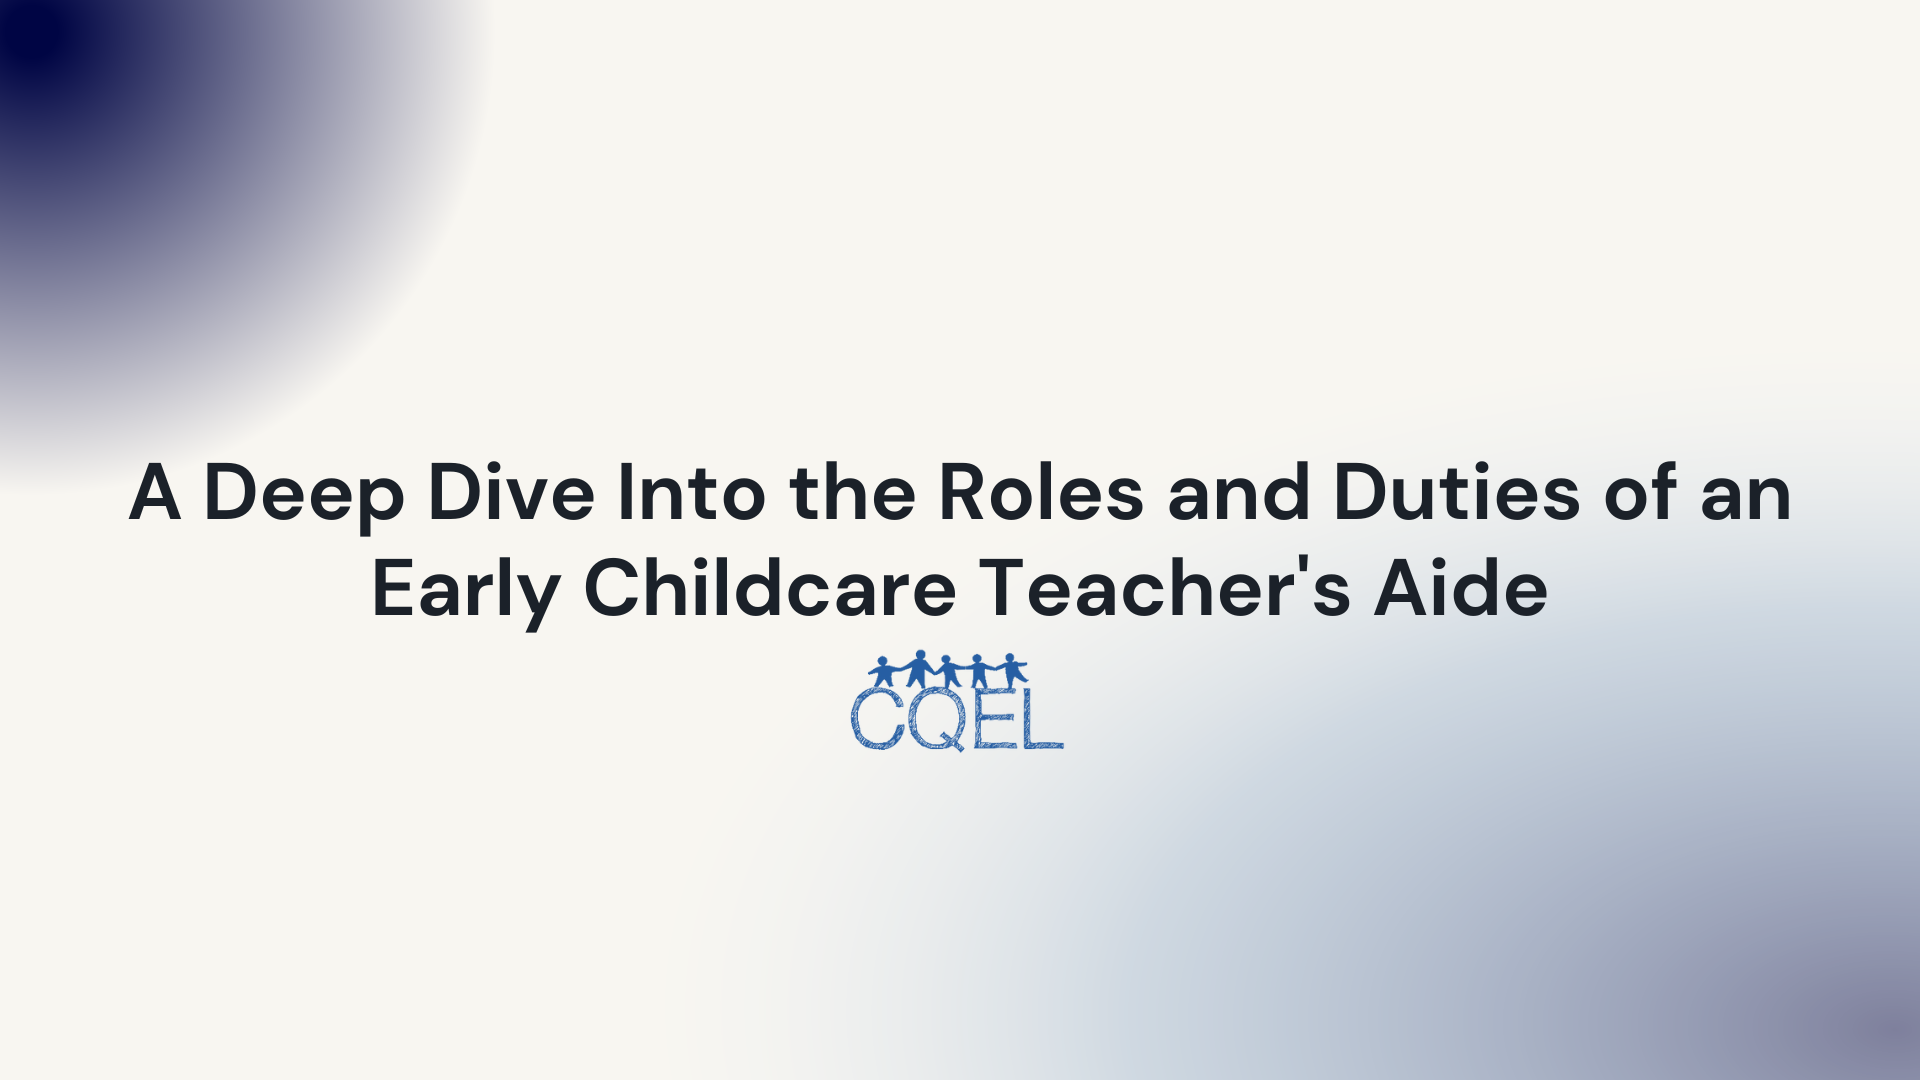 A Deep Dive Into the Roles and Duties of an Early Childcare Teacher's Aide